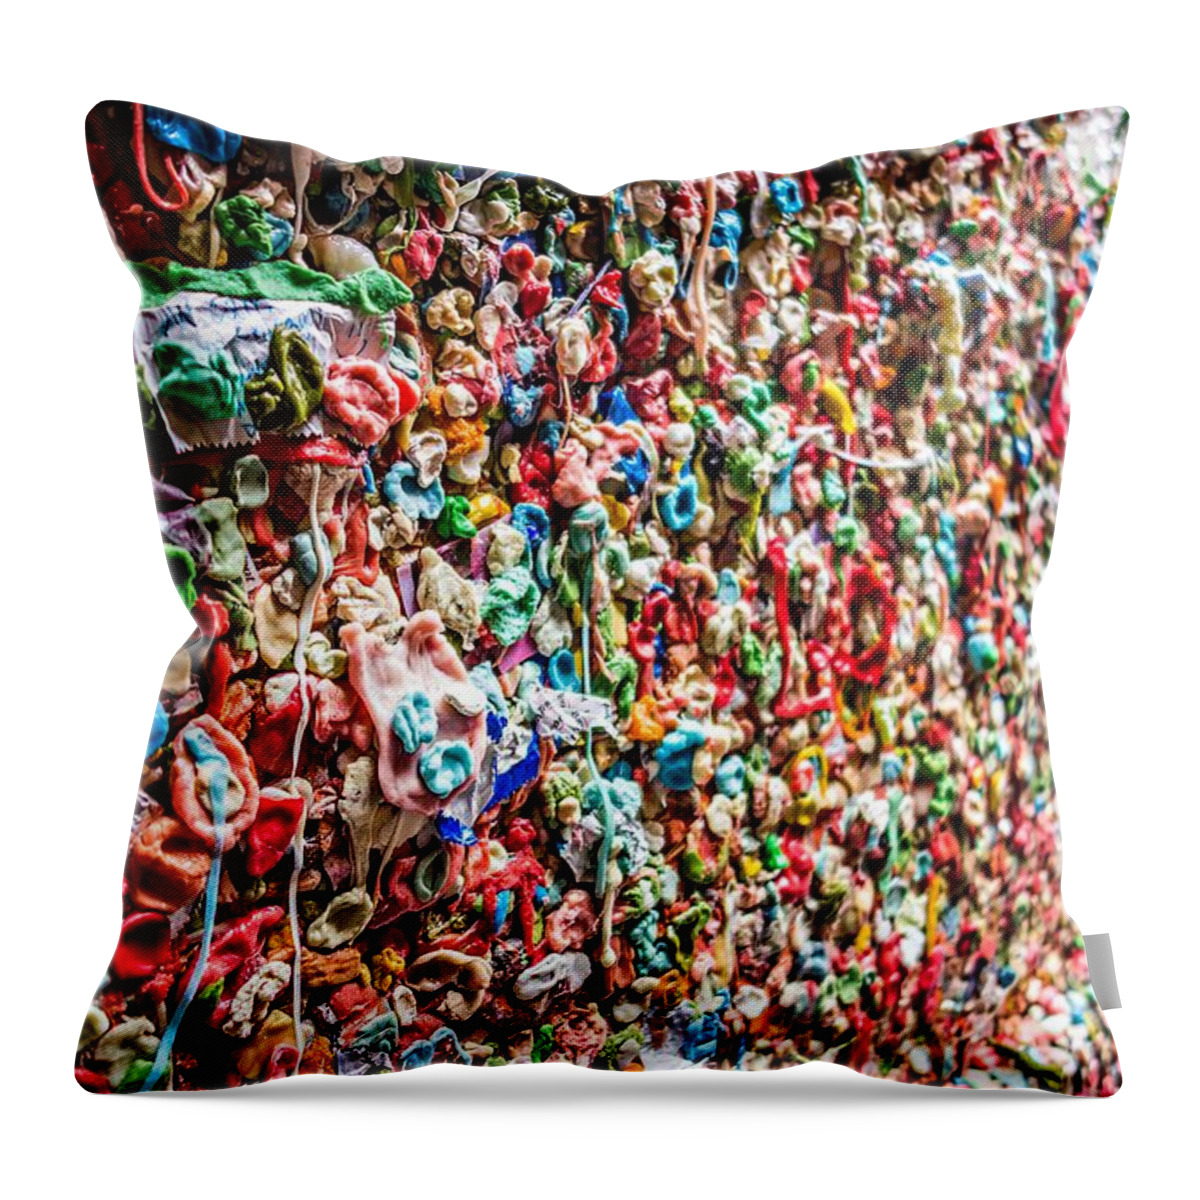 Market Throw Pillow featuring the photograph Pike Market Theater Gum Wall by Alex Grichenko